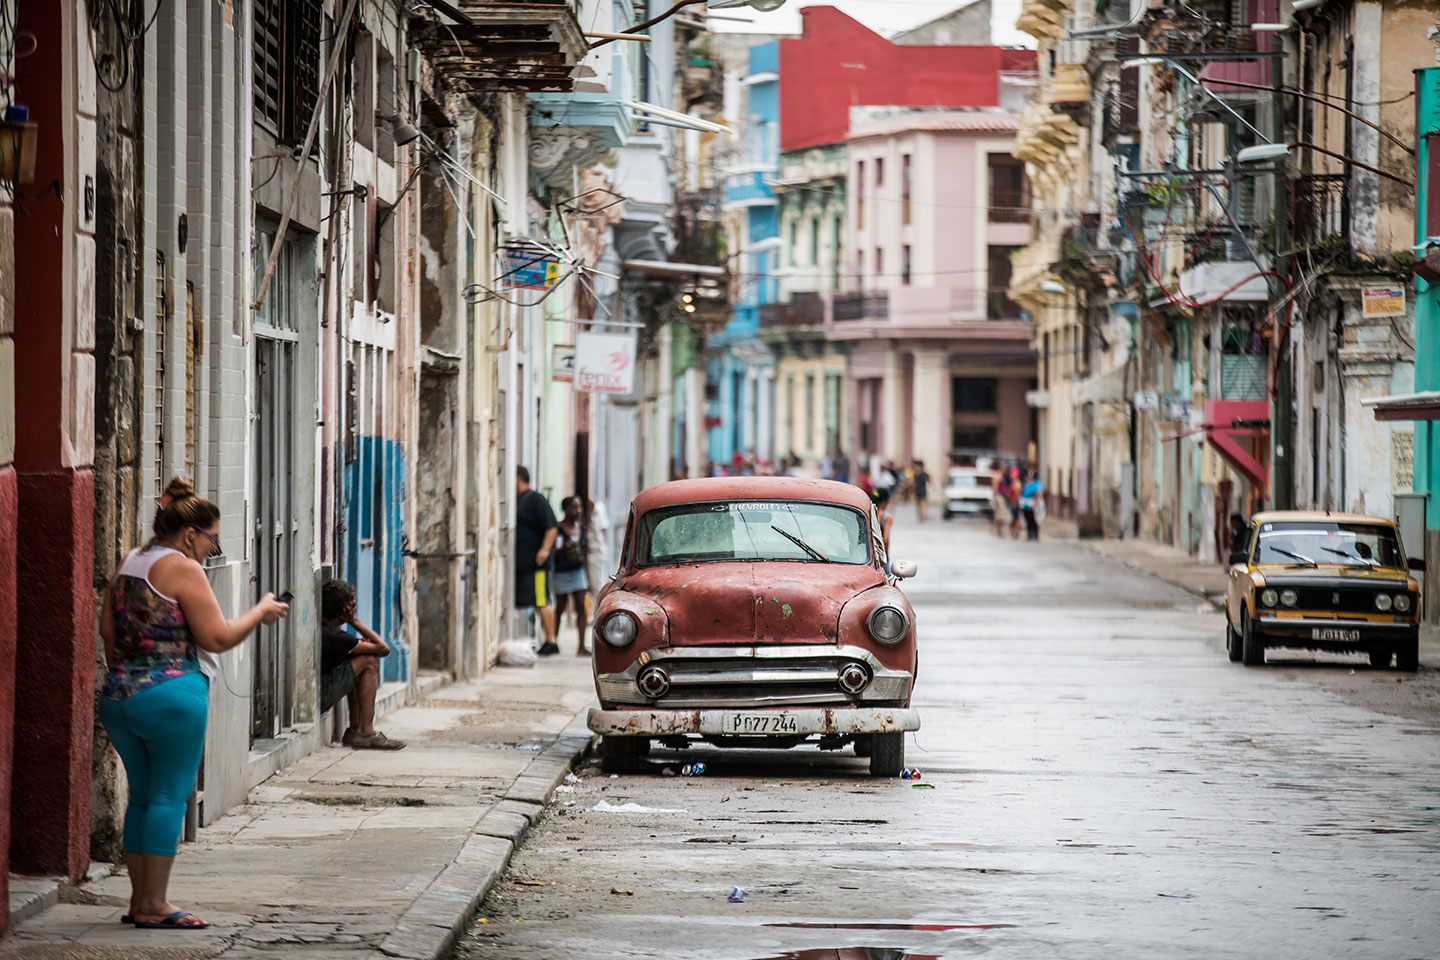 Typical street in Havana, Cuba with vintage old cars